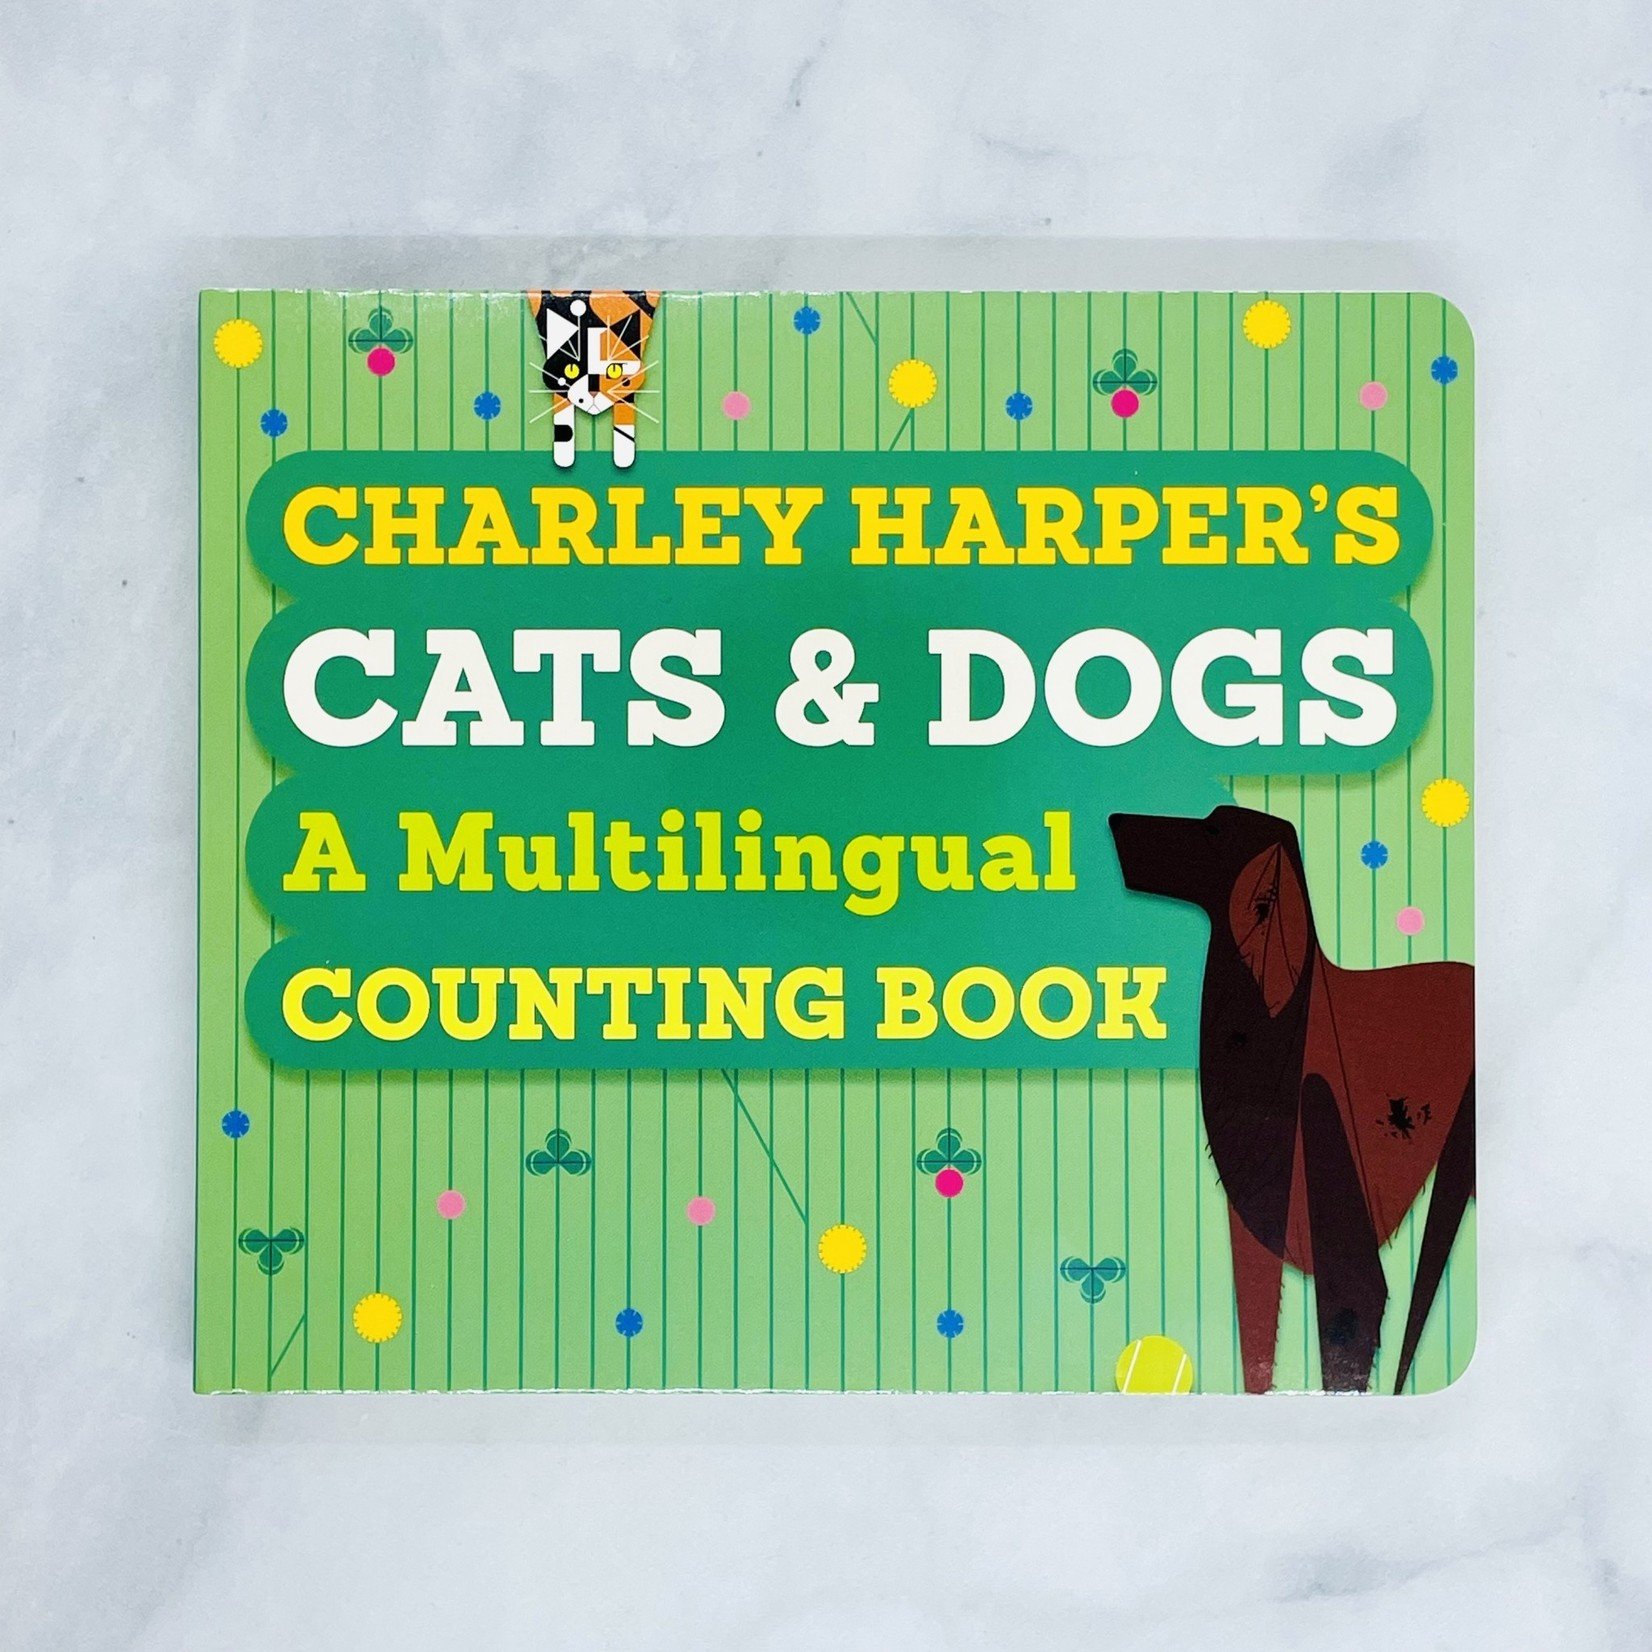 Charley Harper’s Cats and Dogs: Multi-Lingual Counting Book